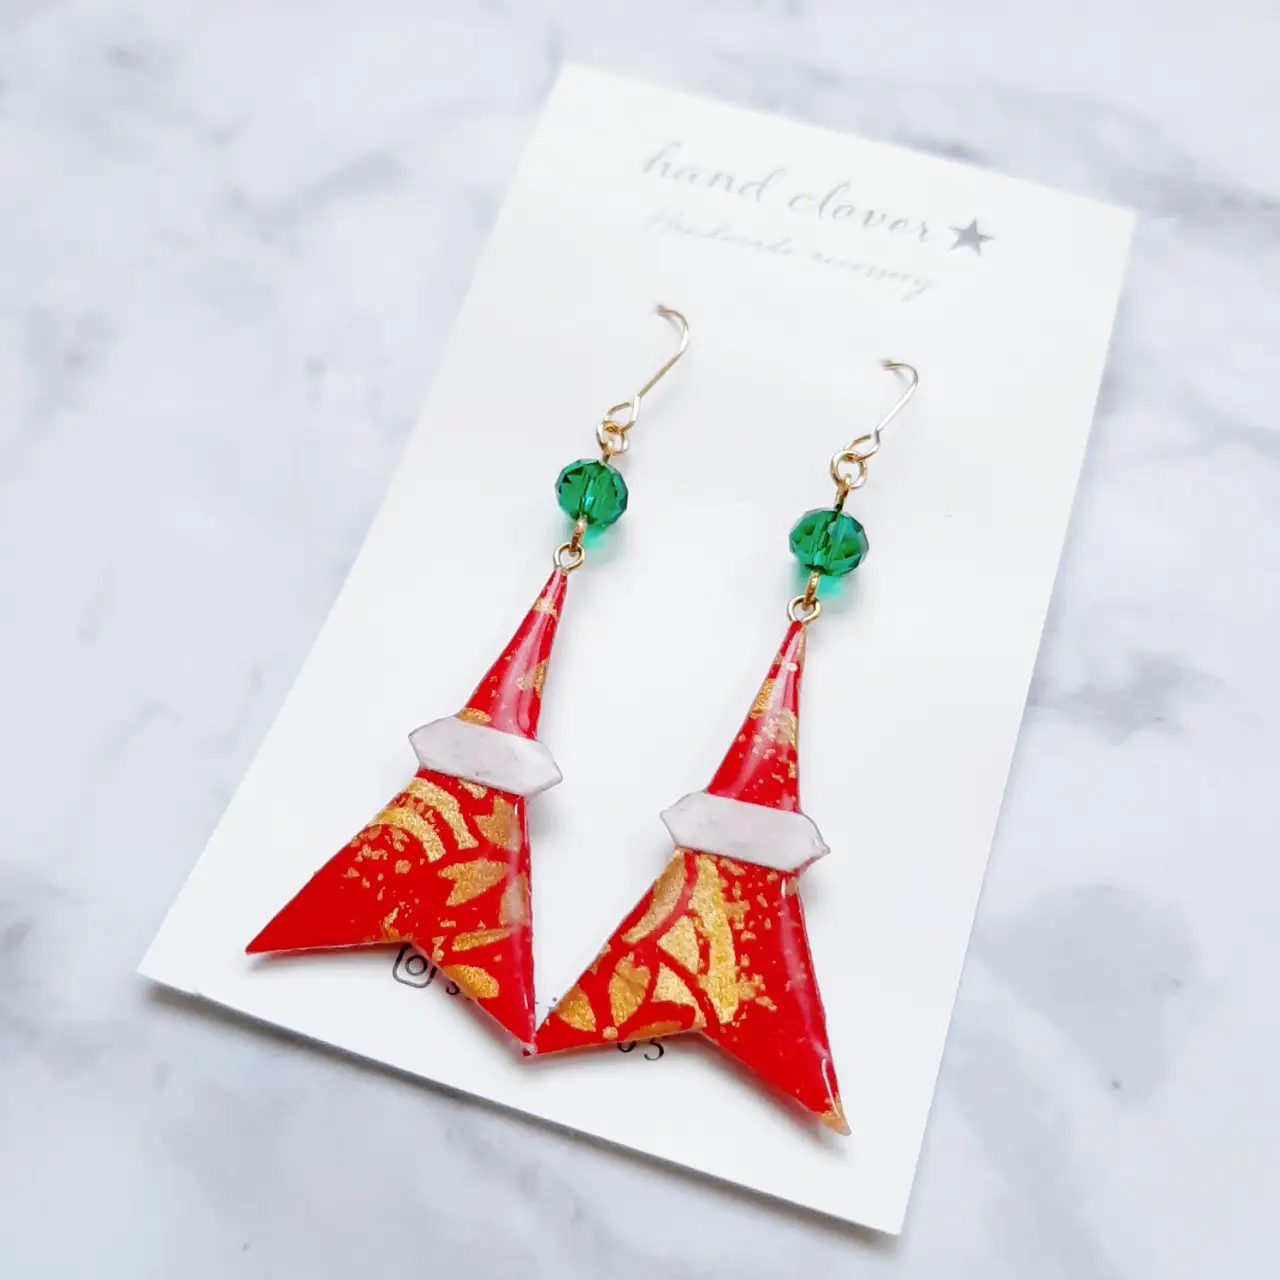 Origami Earrings from Tokyo Tower | Gallery posted by hand clover